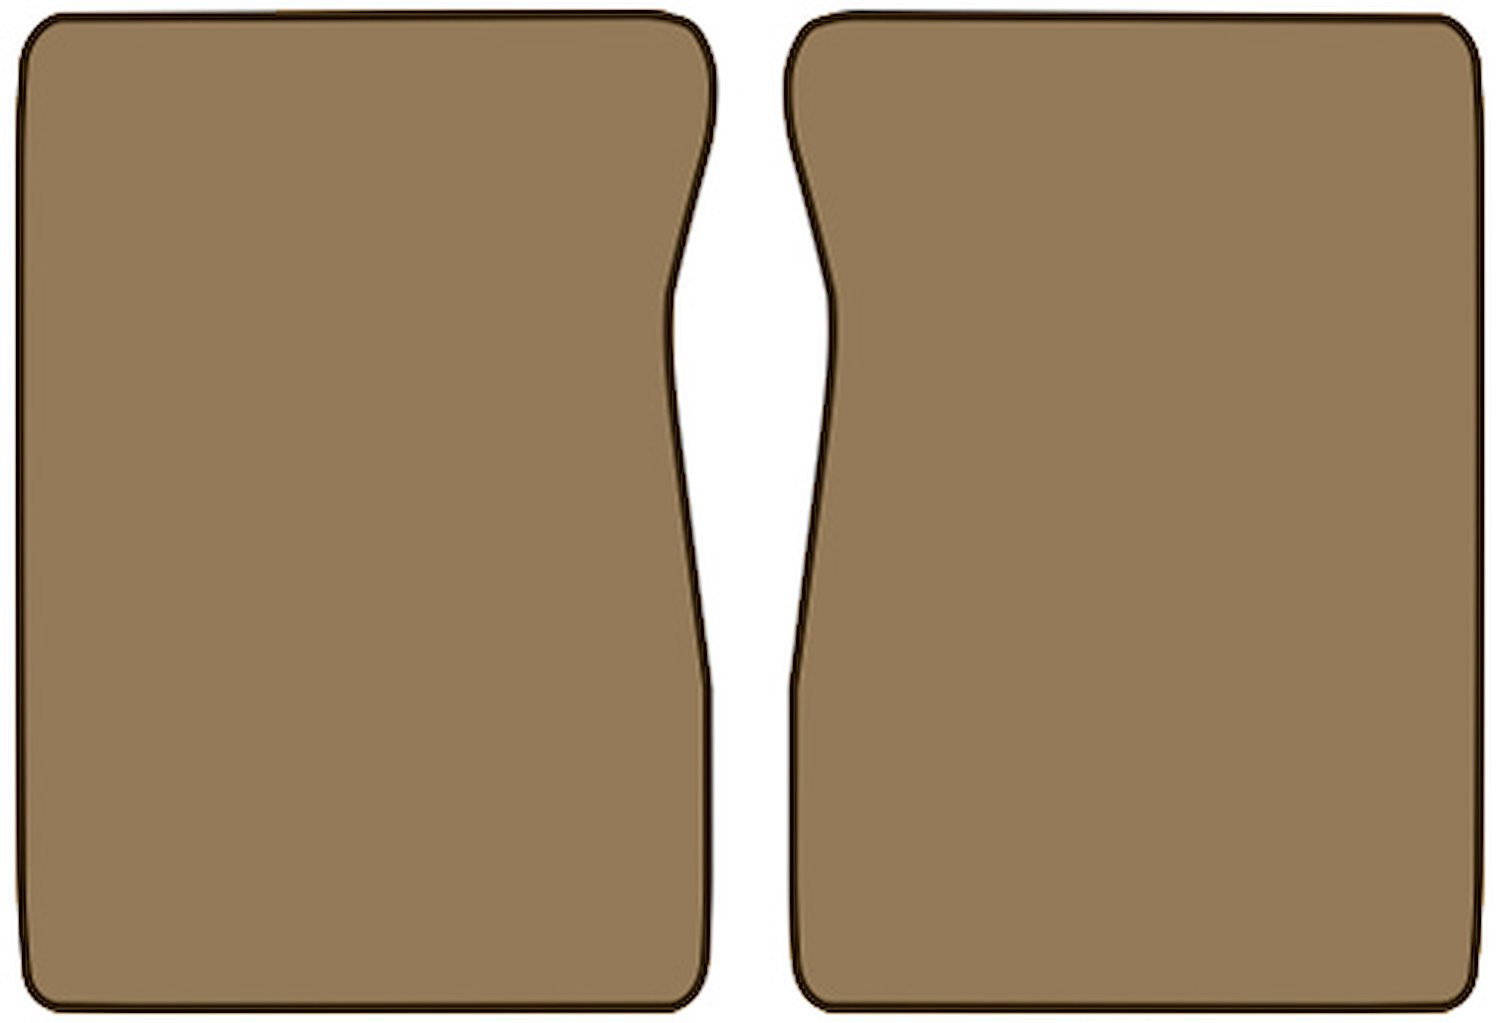 Molded Cut Pile Floor Mats for 1975-1980 C/K Series Chevrolet and GMC Trucks [2-Piece, Doeskin]